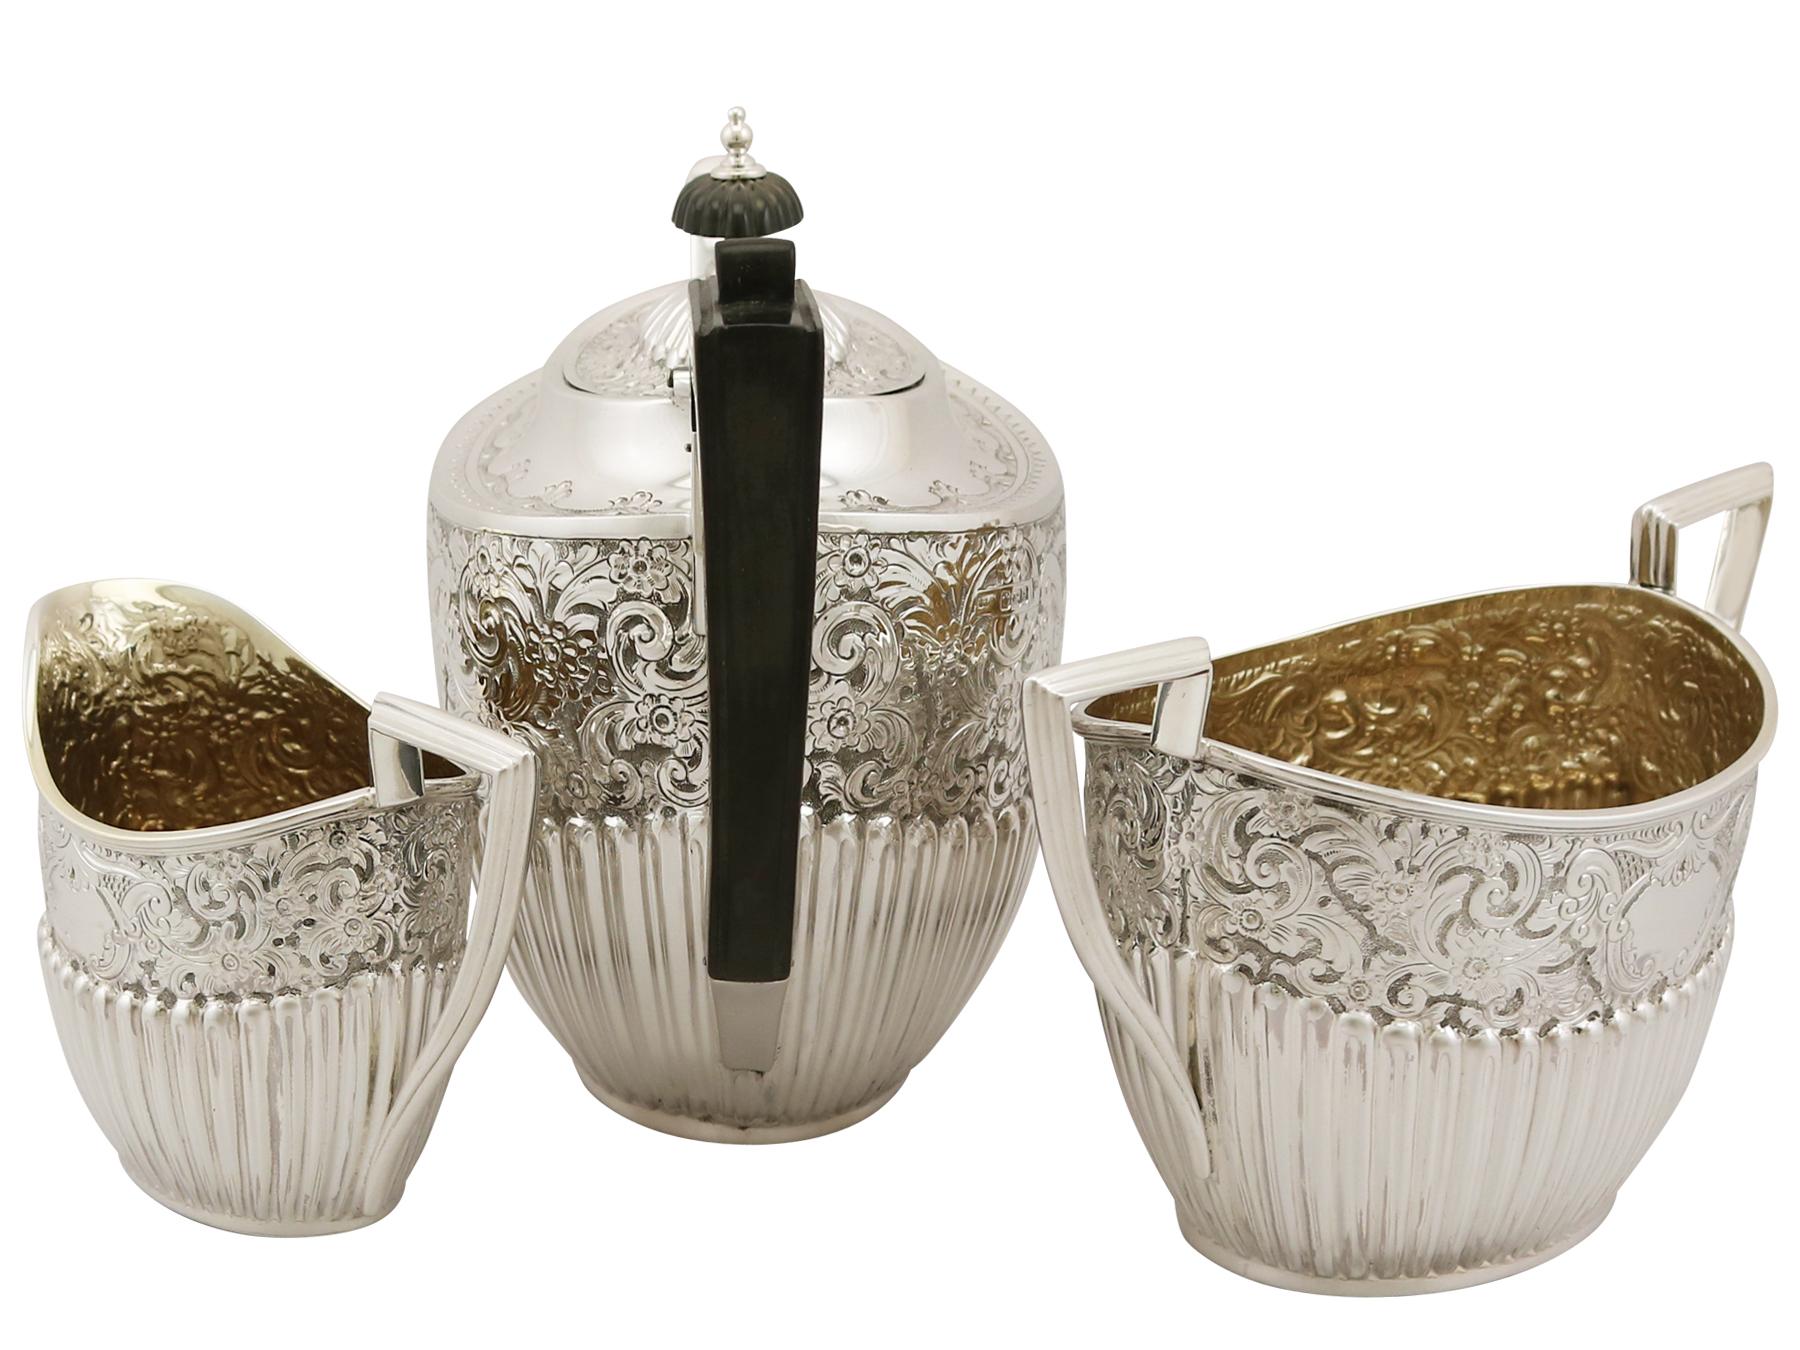 A fine and impressive antique Victorian English sterling silver three piece tea service / set in the Queen Anne style; part of our silver teaware collection.

This impressive antique Victorian sterling silver tea set has been modelled in the Queen